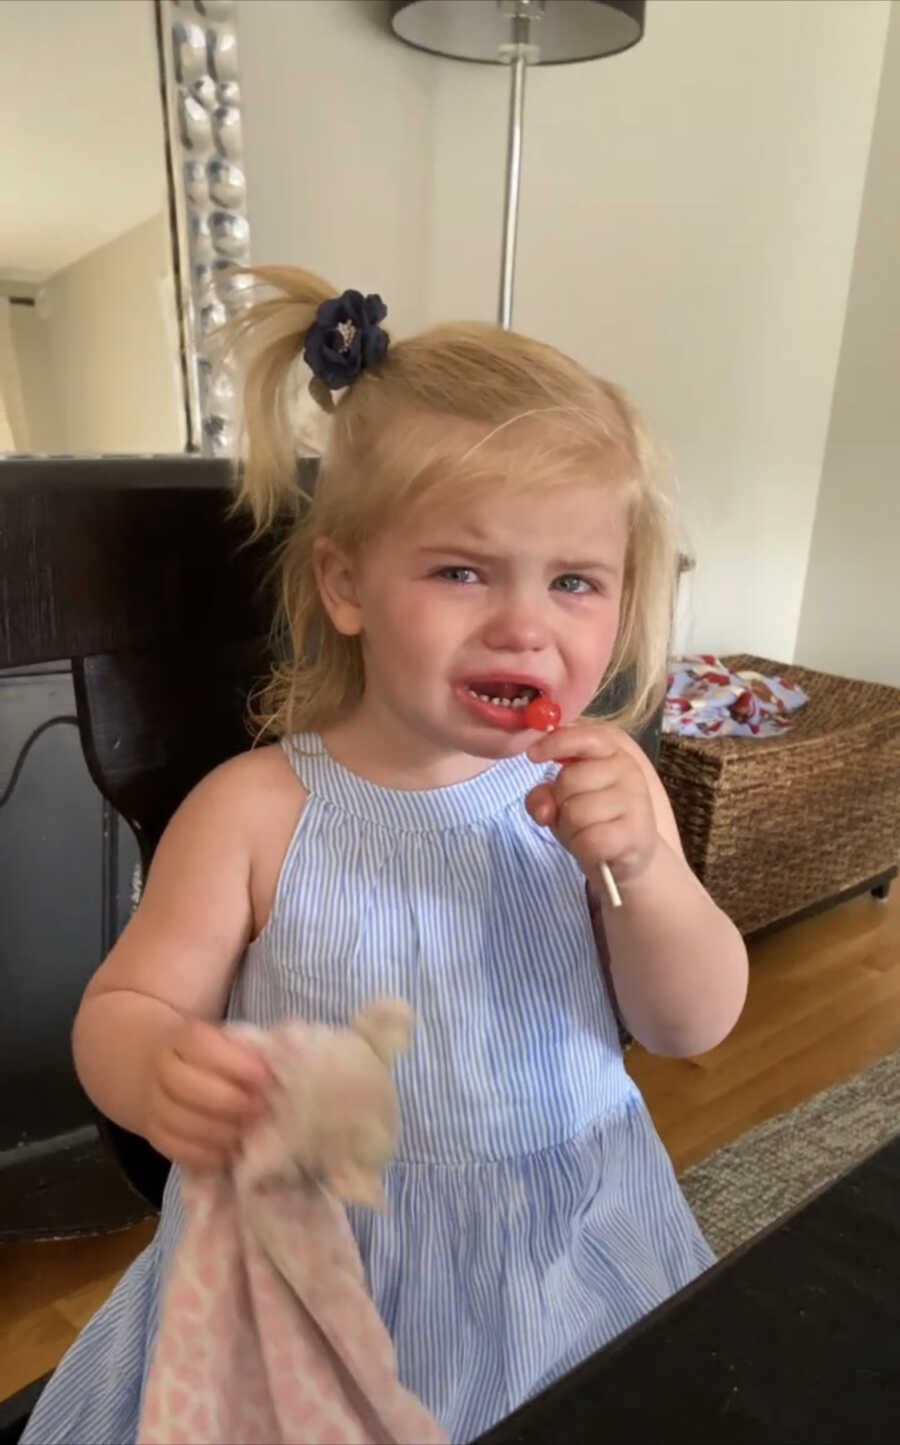 little girl upset eating a piece of candy